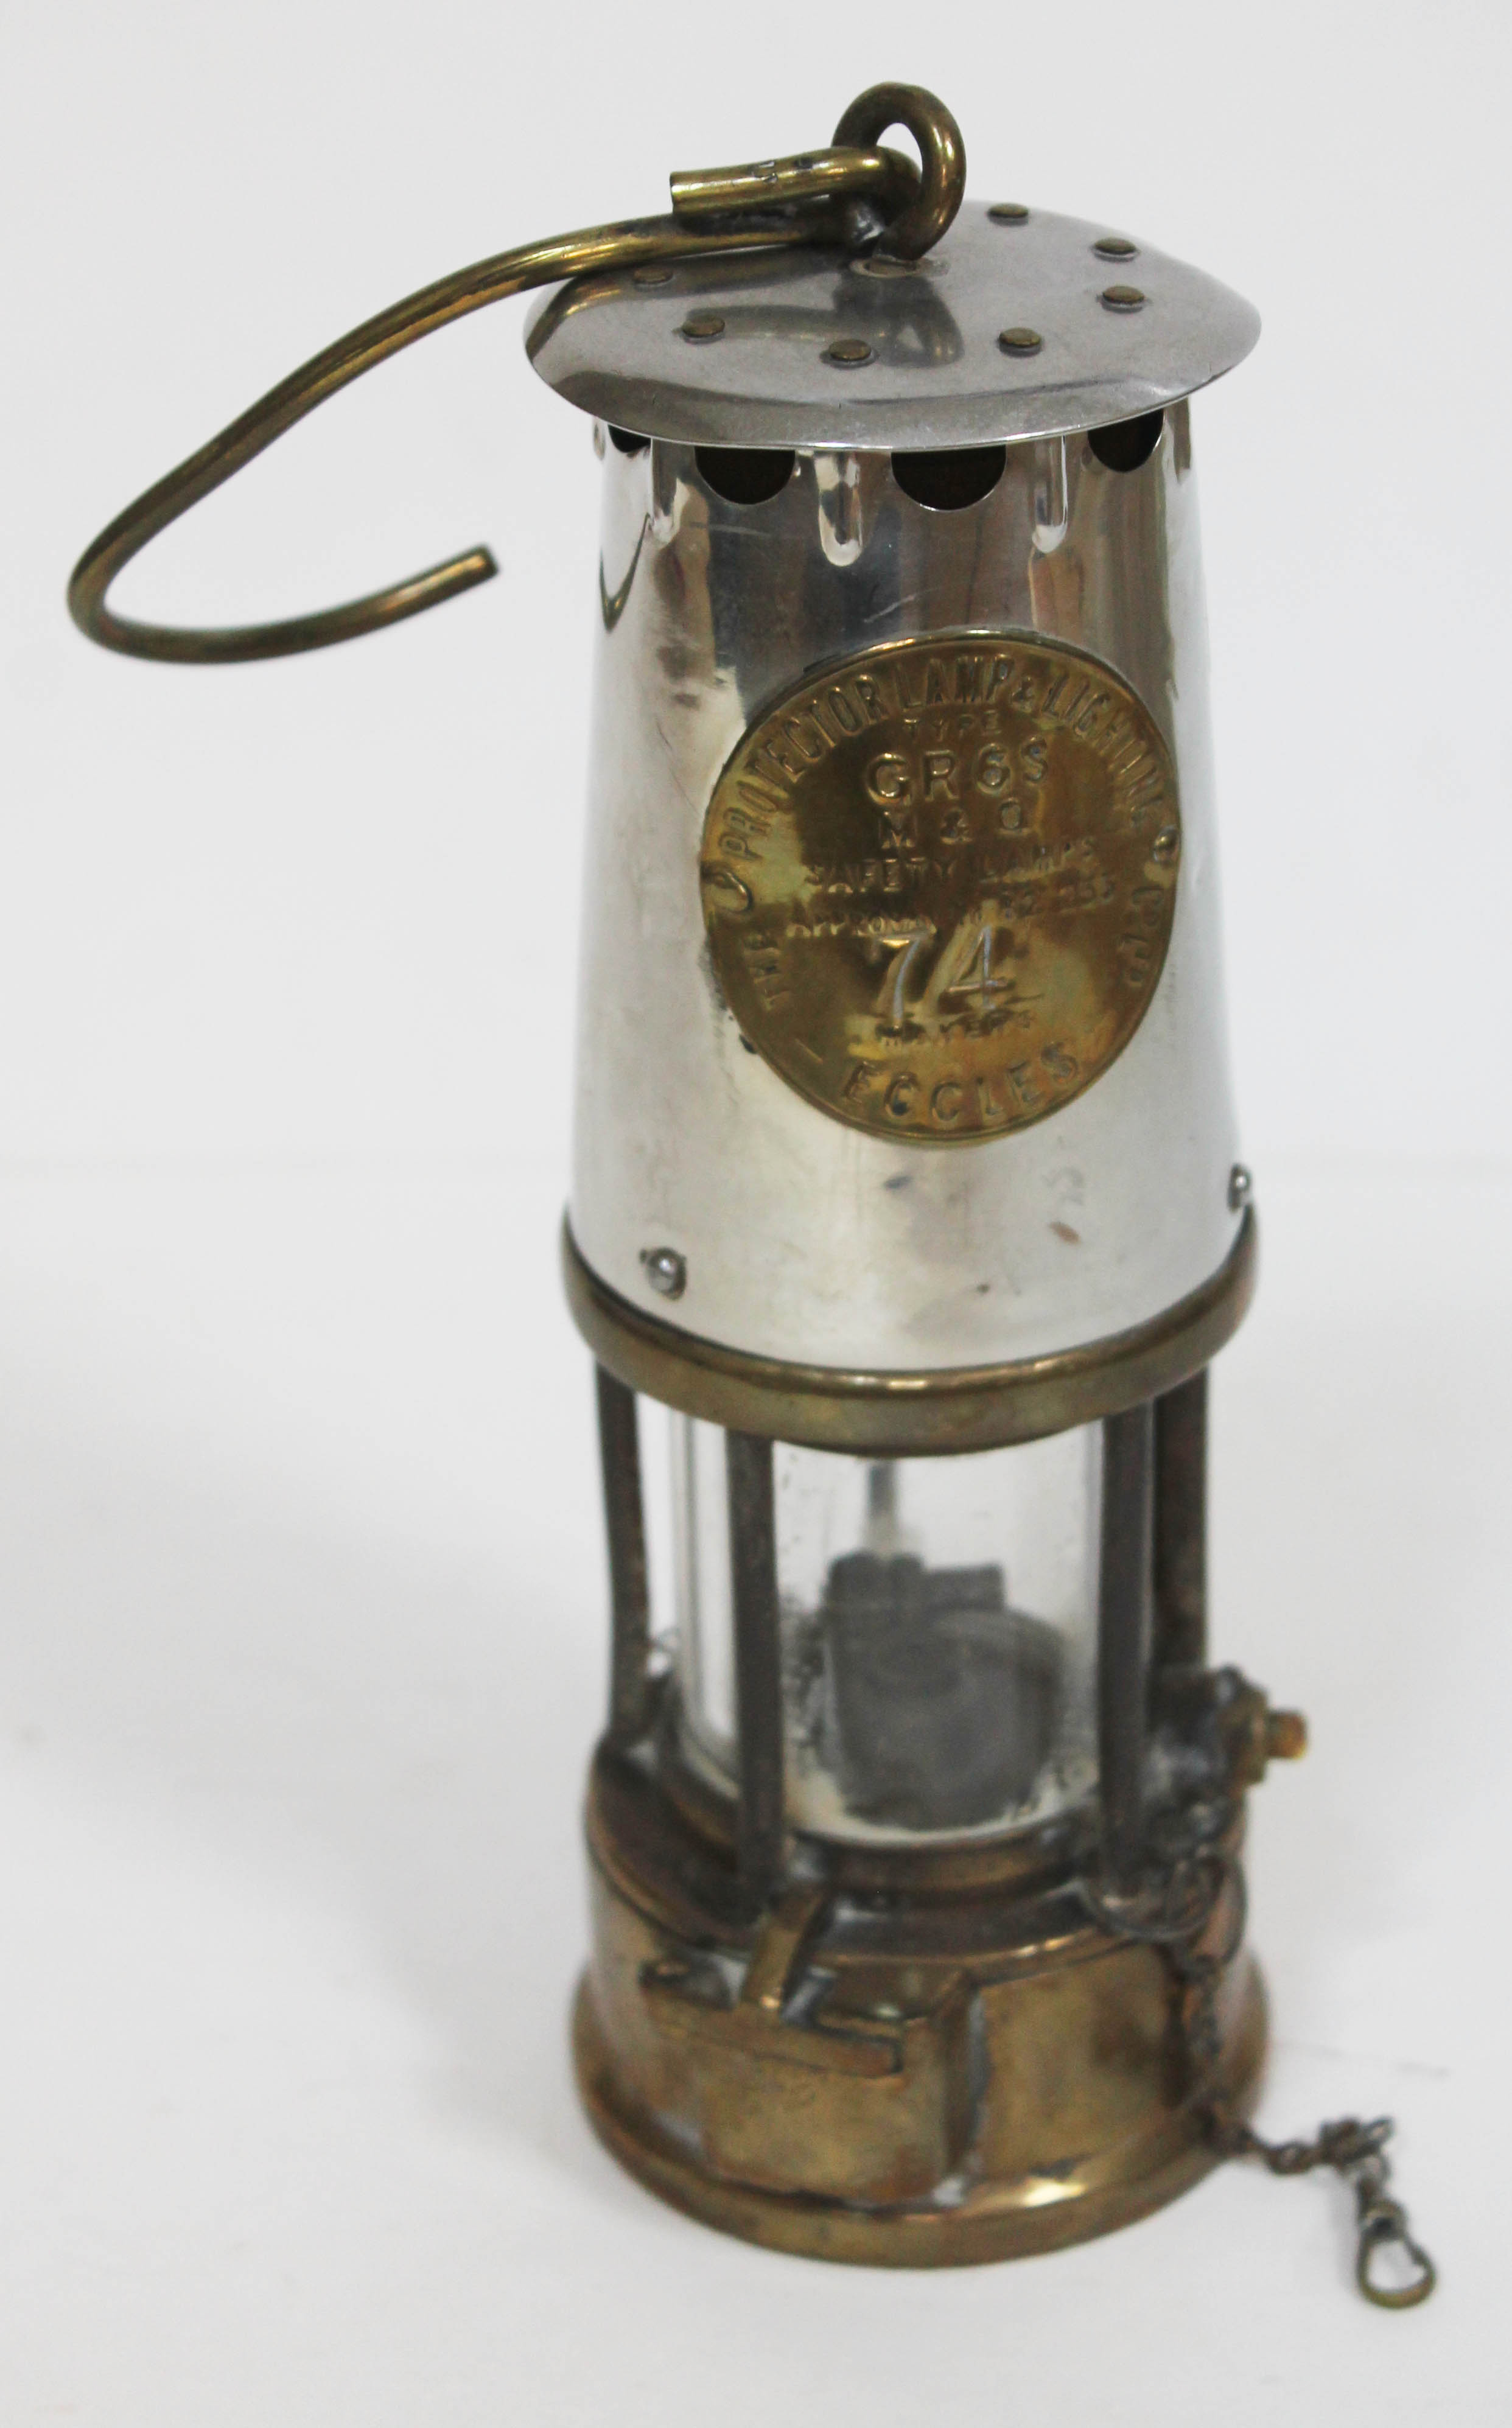 A miners lamp, The Protector Lamp and Lighting Co Ltd, Eccles.